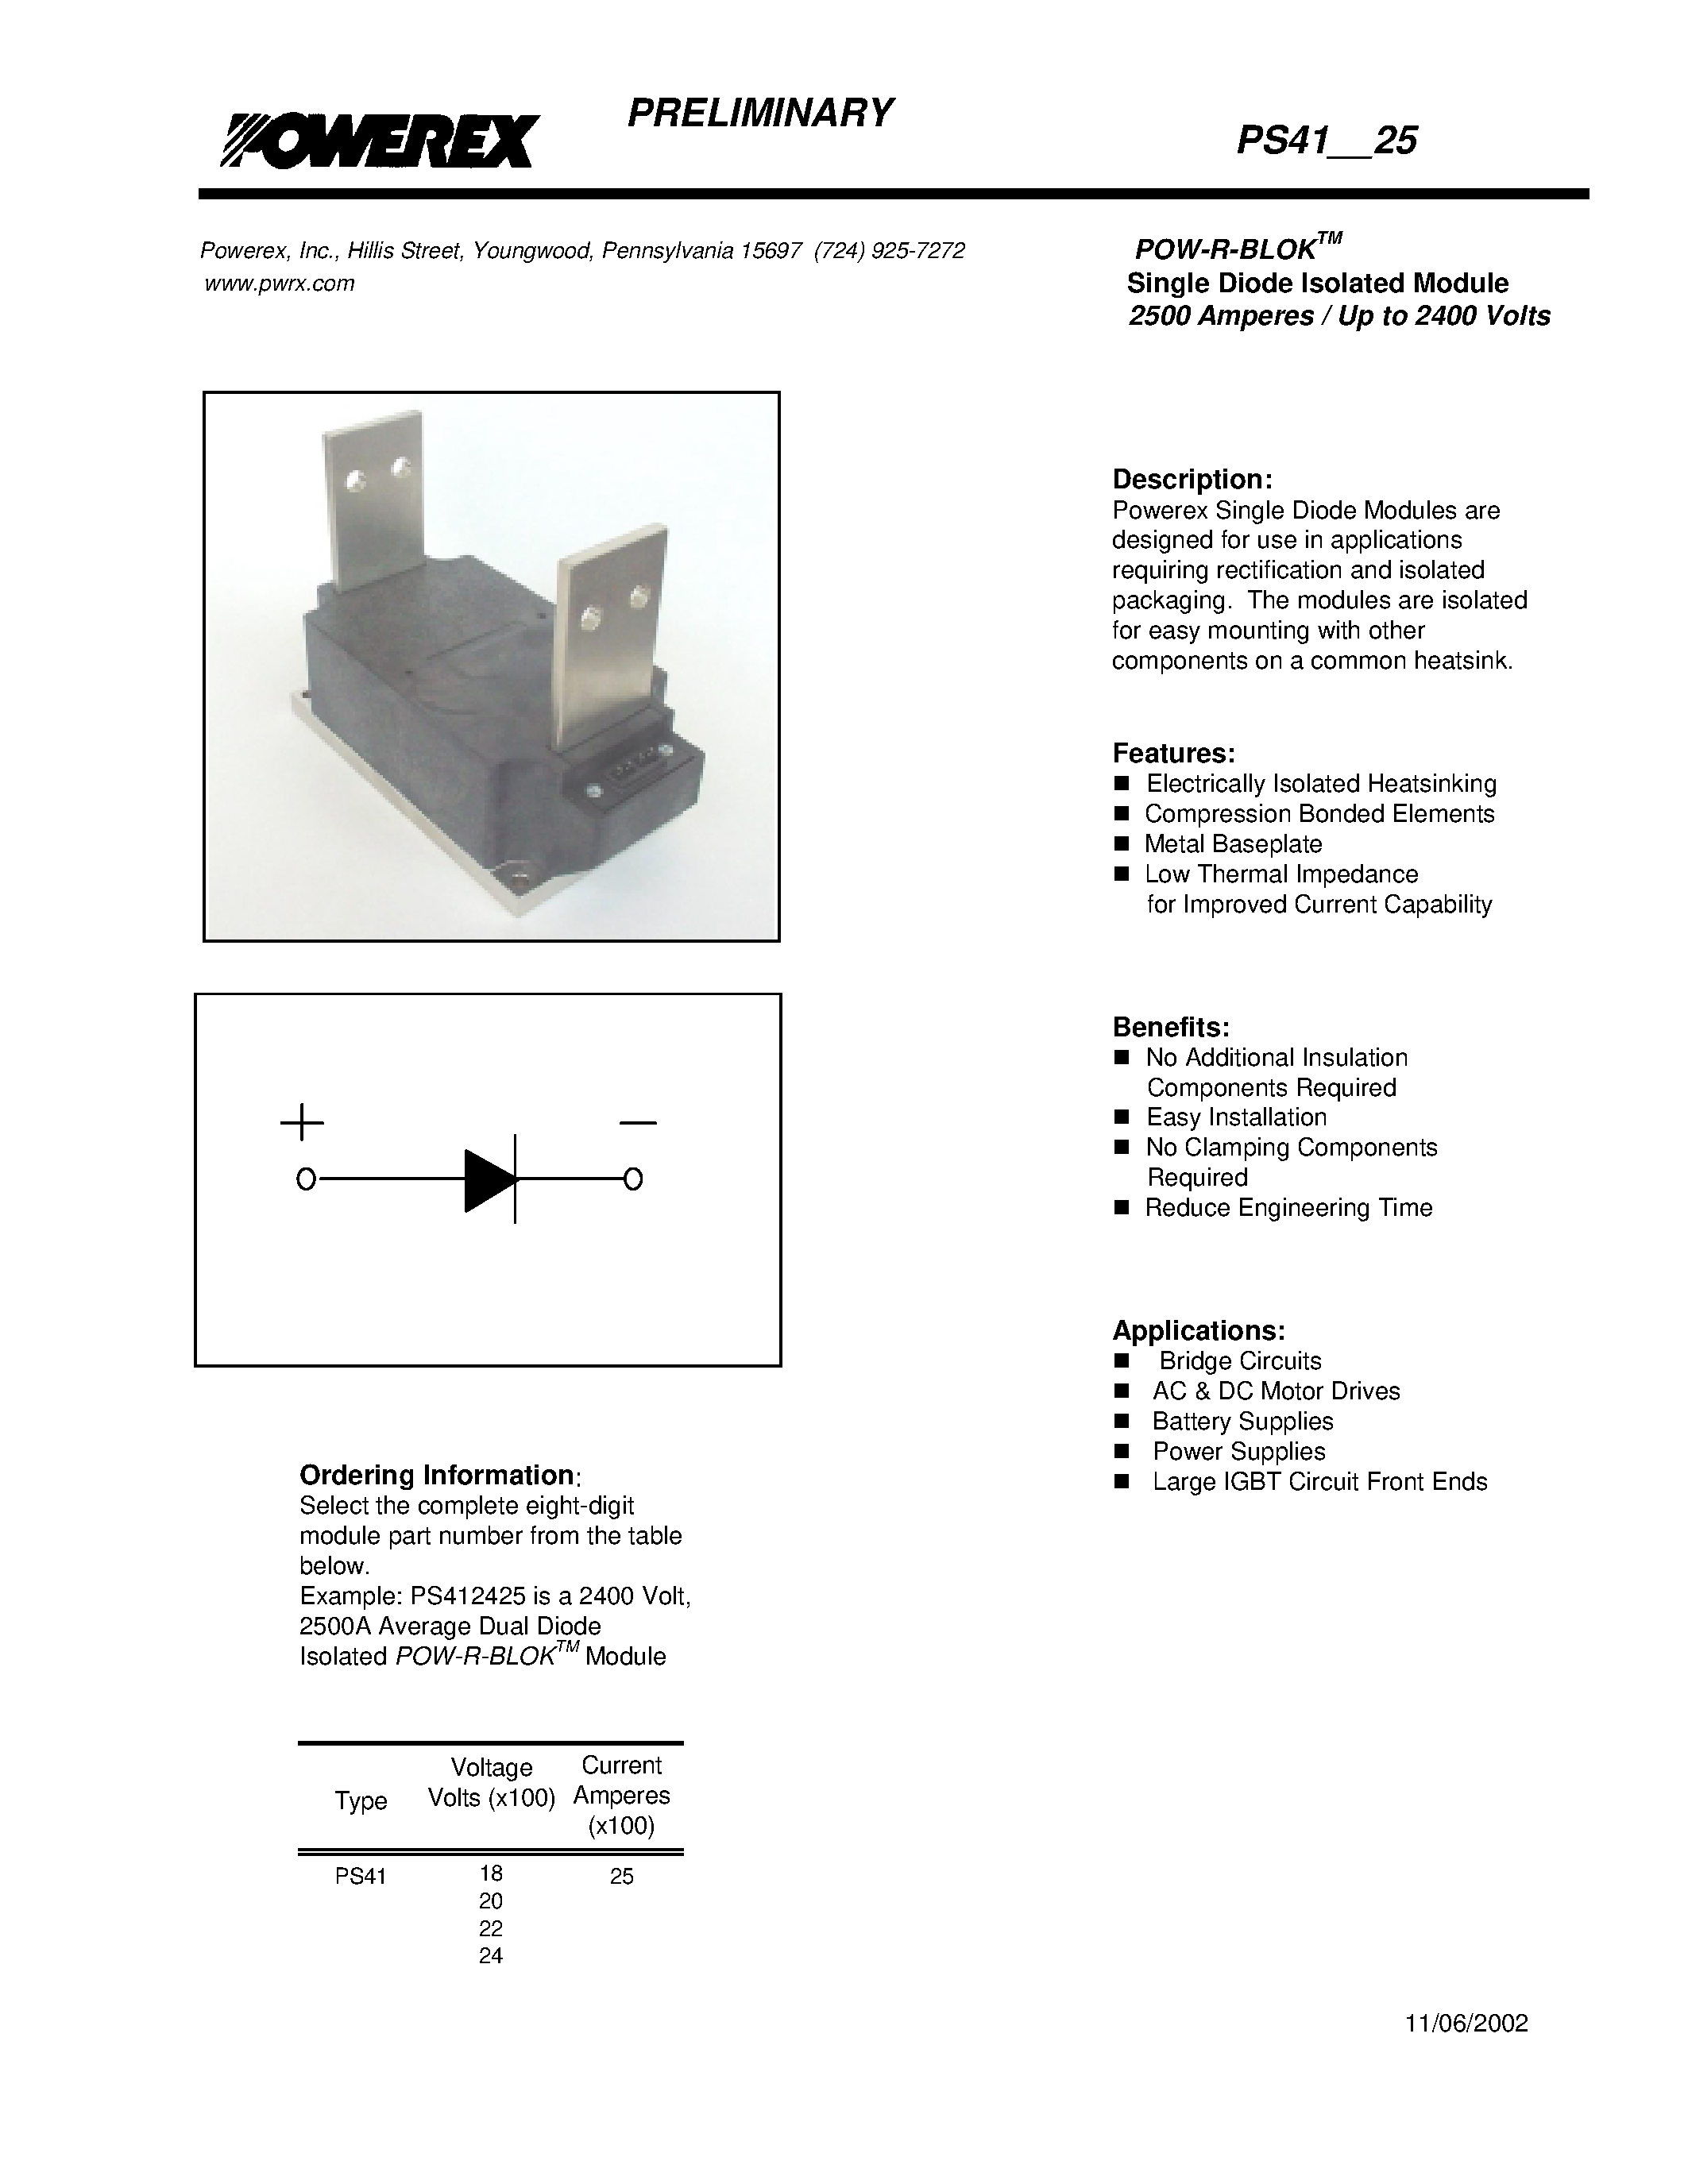 Даташит P411825 - POW-R-BLOK Single Diode Isolated Module (2500 Amperes / Up to 2400 Volts) страница 1